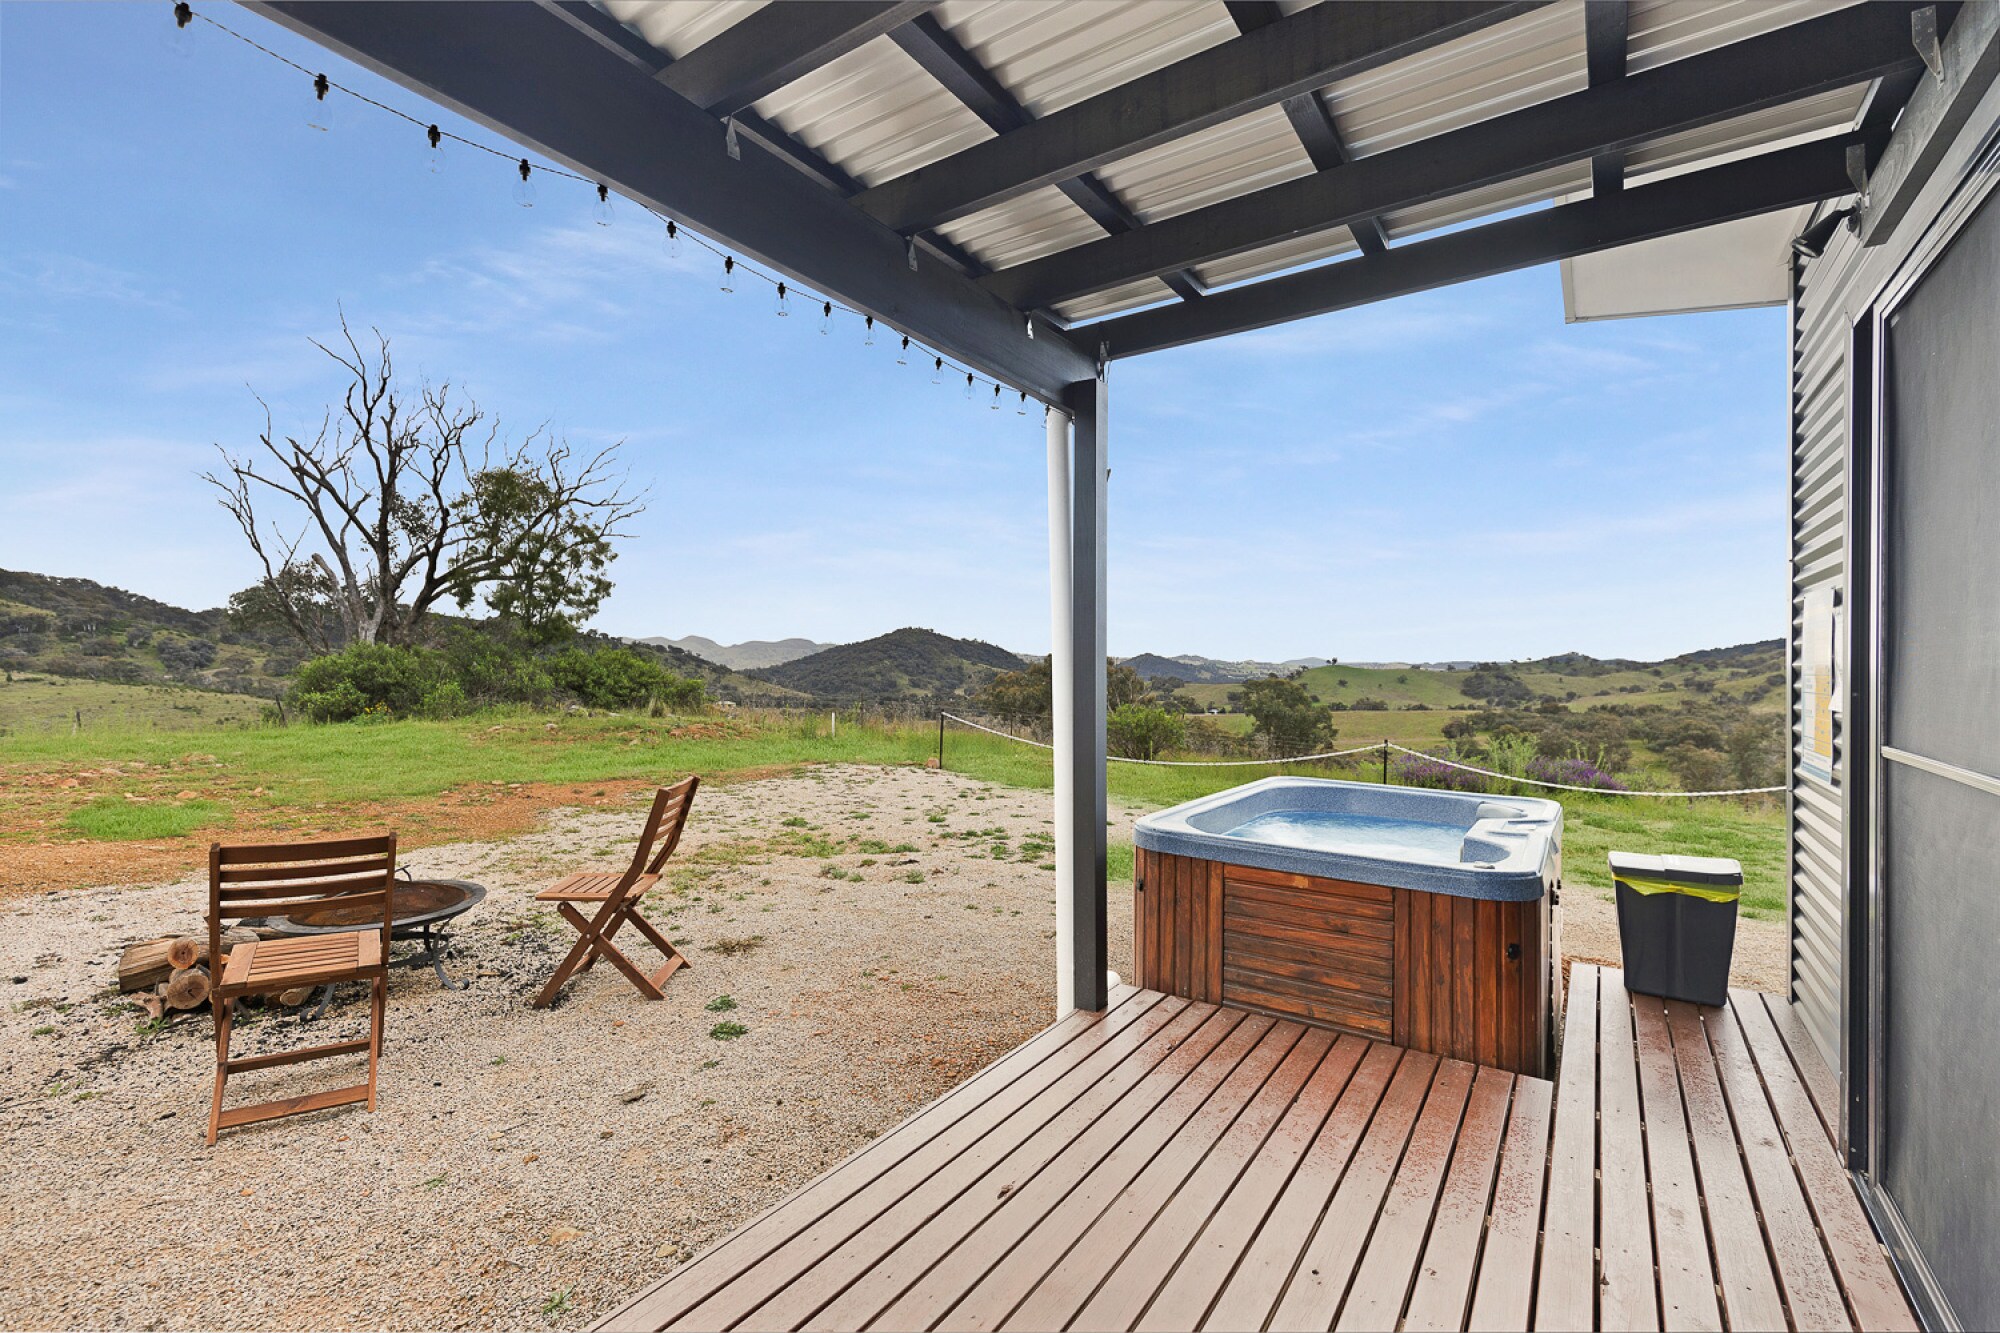 Outdoor Area with Hot Tub